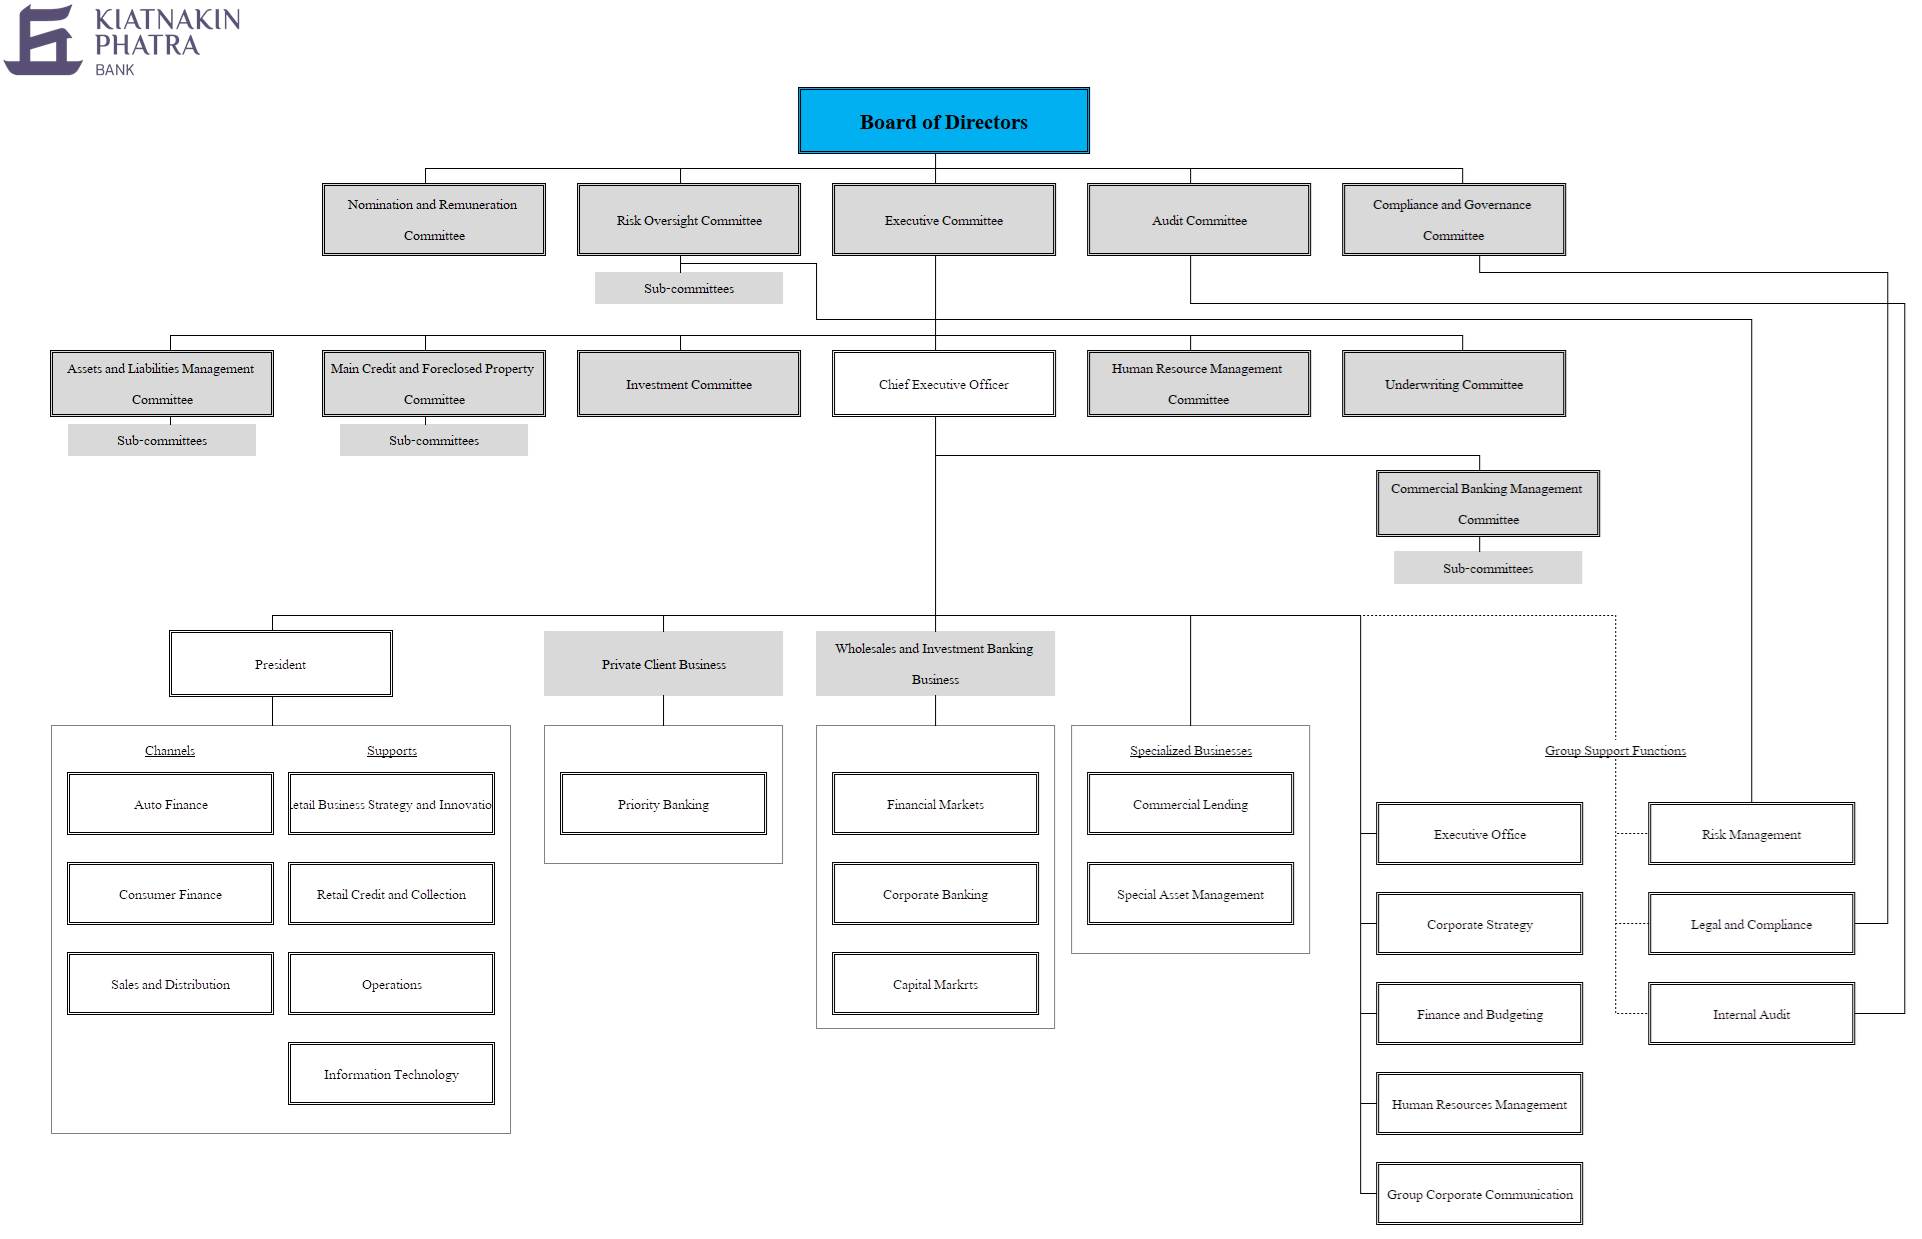 Organisation Structure Of Hdfc Bank 9223